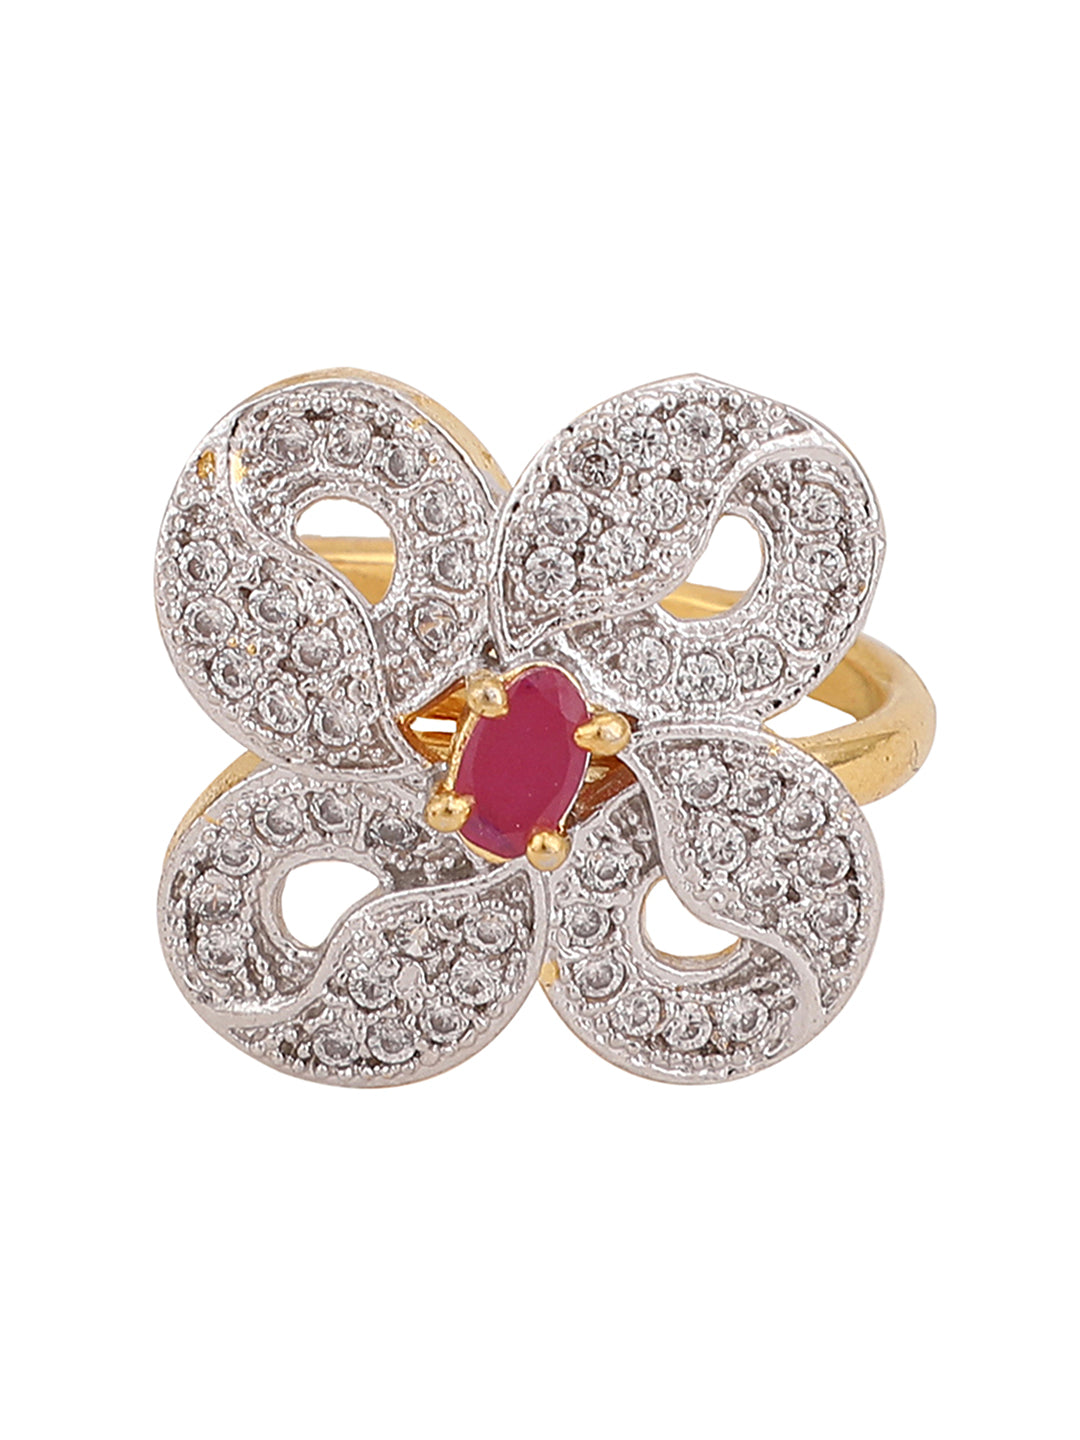 Women's White And Magenta American Diamond Studded Floral Motif Cocktail Ring - Anikas Creation